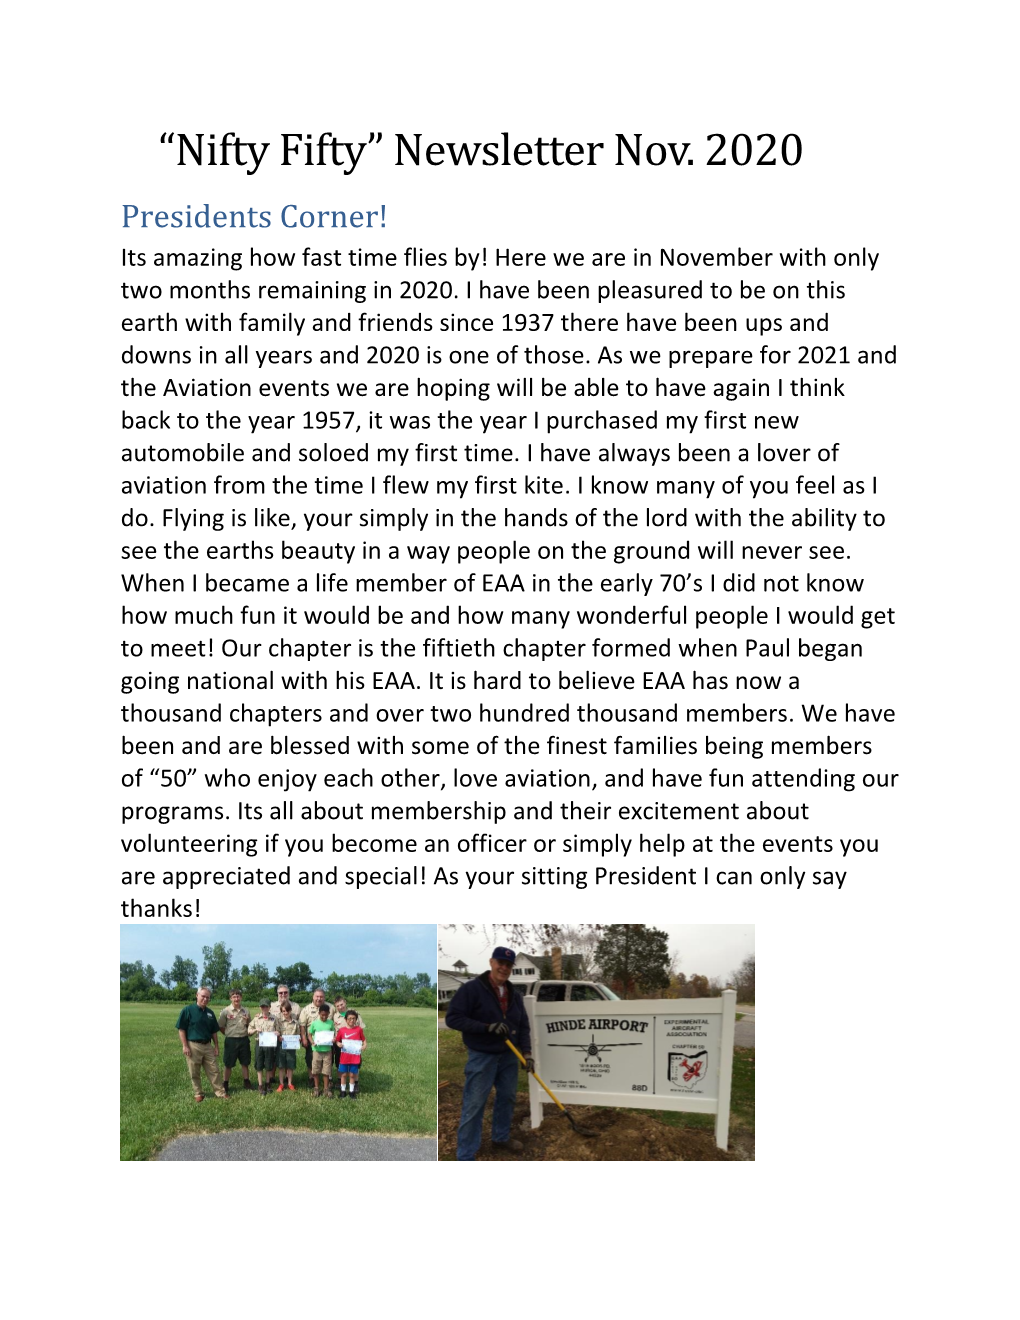 “Nifty Fifty” Newsletter Nov. 2020 Presidents Corner! Its Amazing How Fast Time Flies By! Here We Are in November with Only Two Months Remaining in 2020